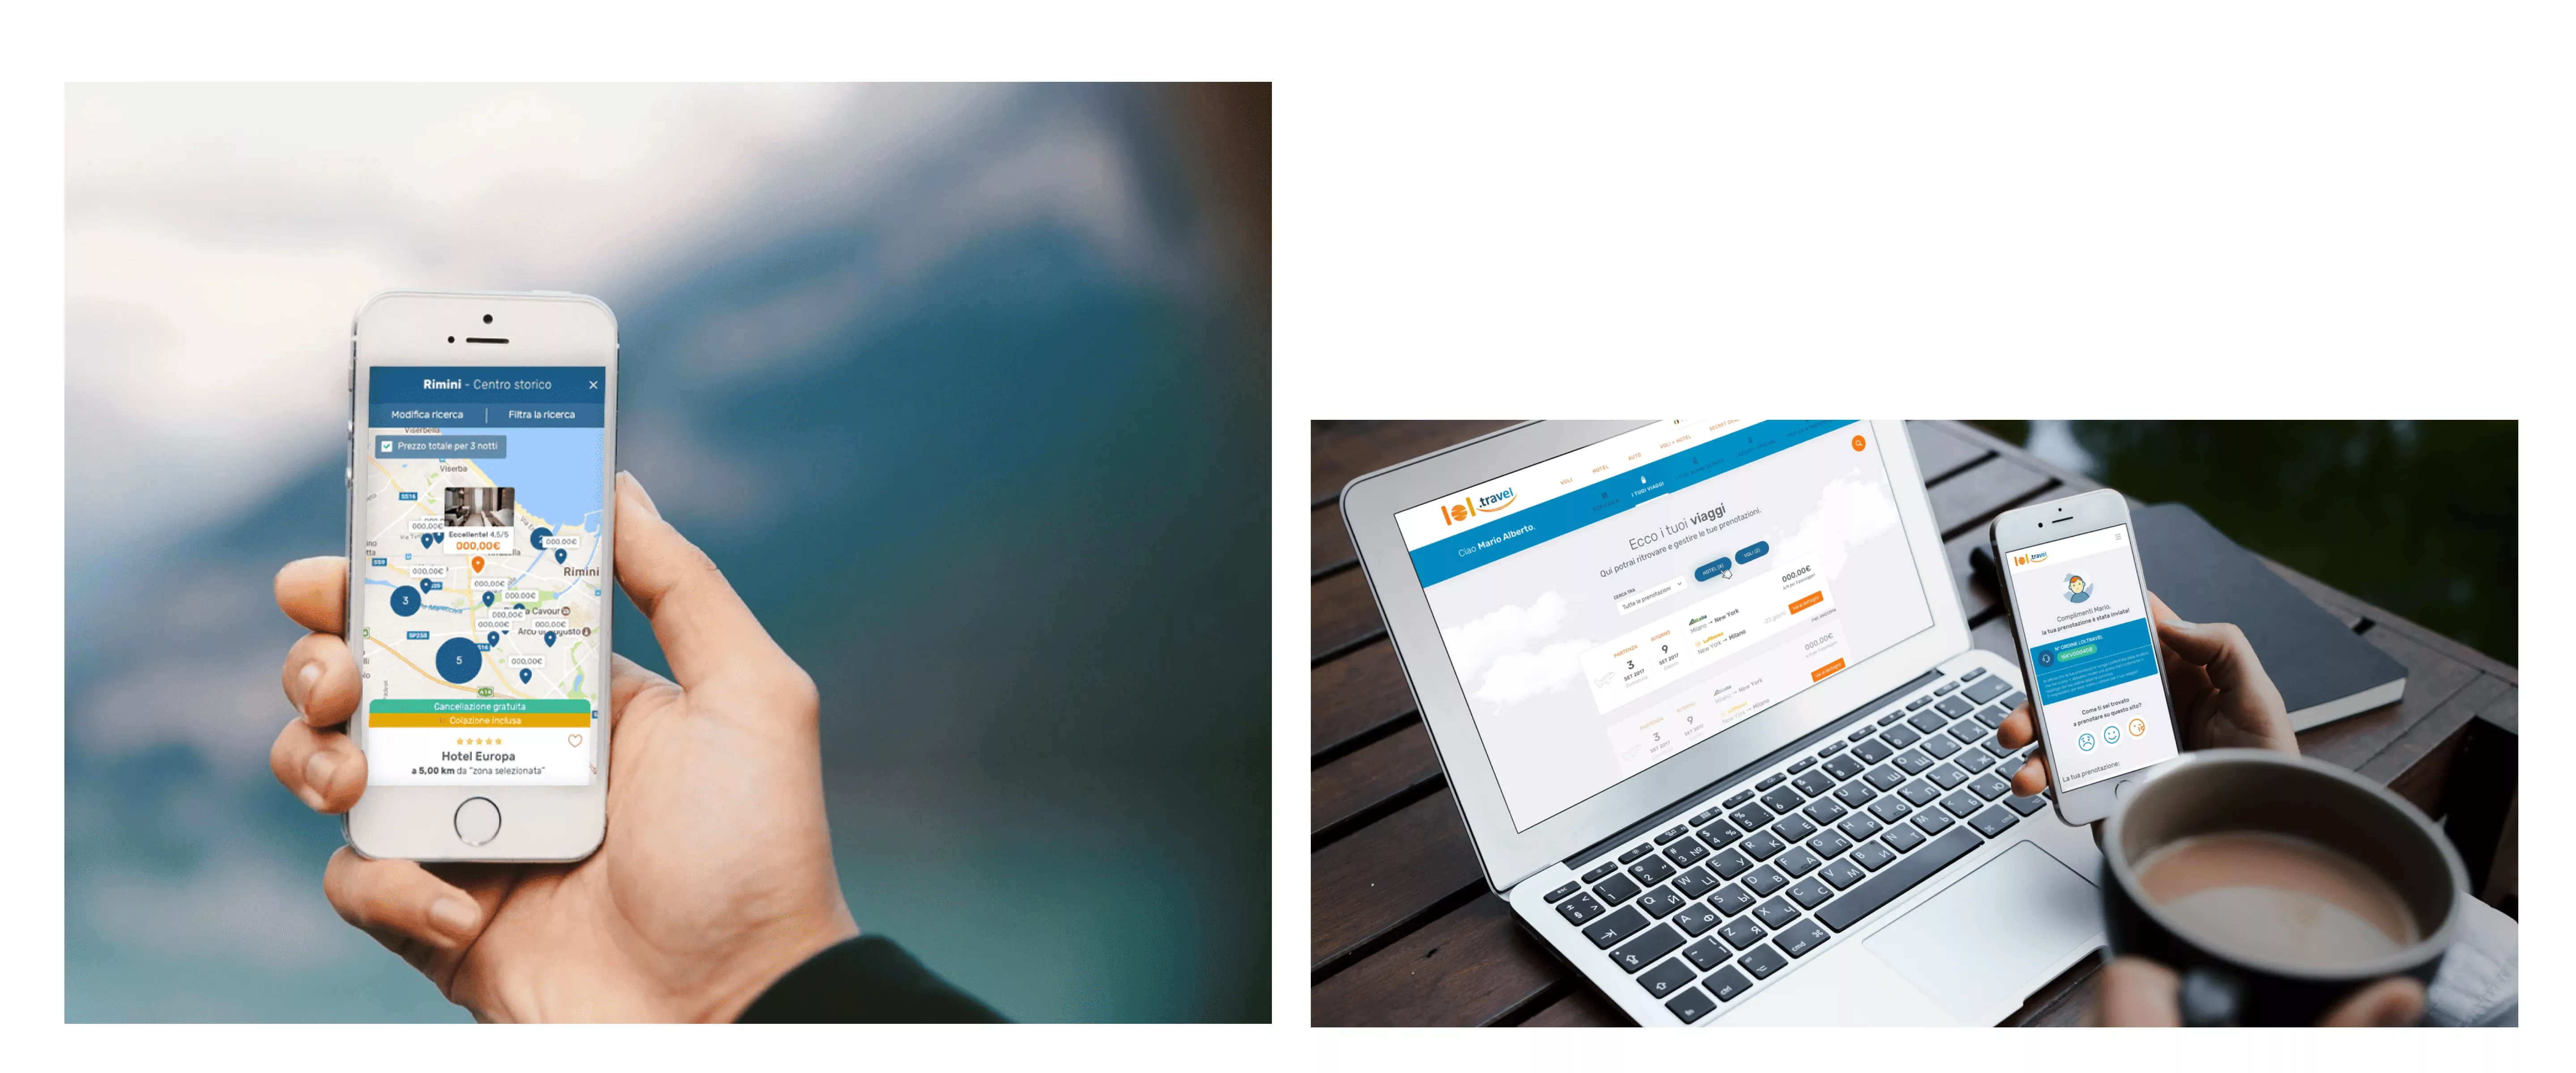 two photos: in the one on the left a hand holds a smartphone with a screenshot of the site; on the right a laptop and a hand holds a smartphone